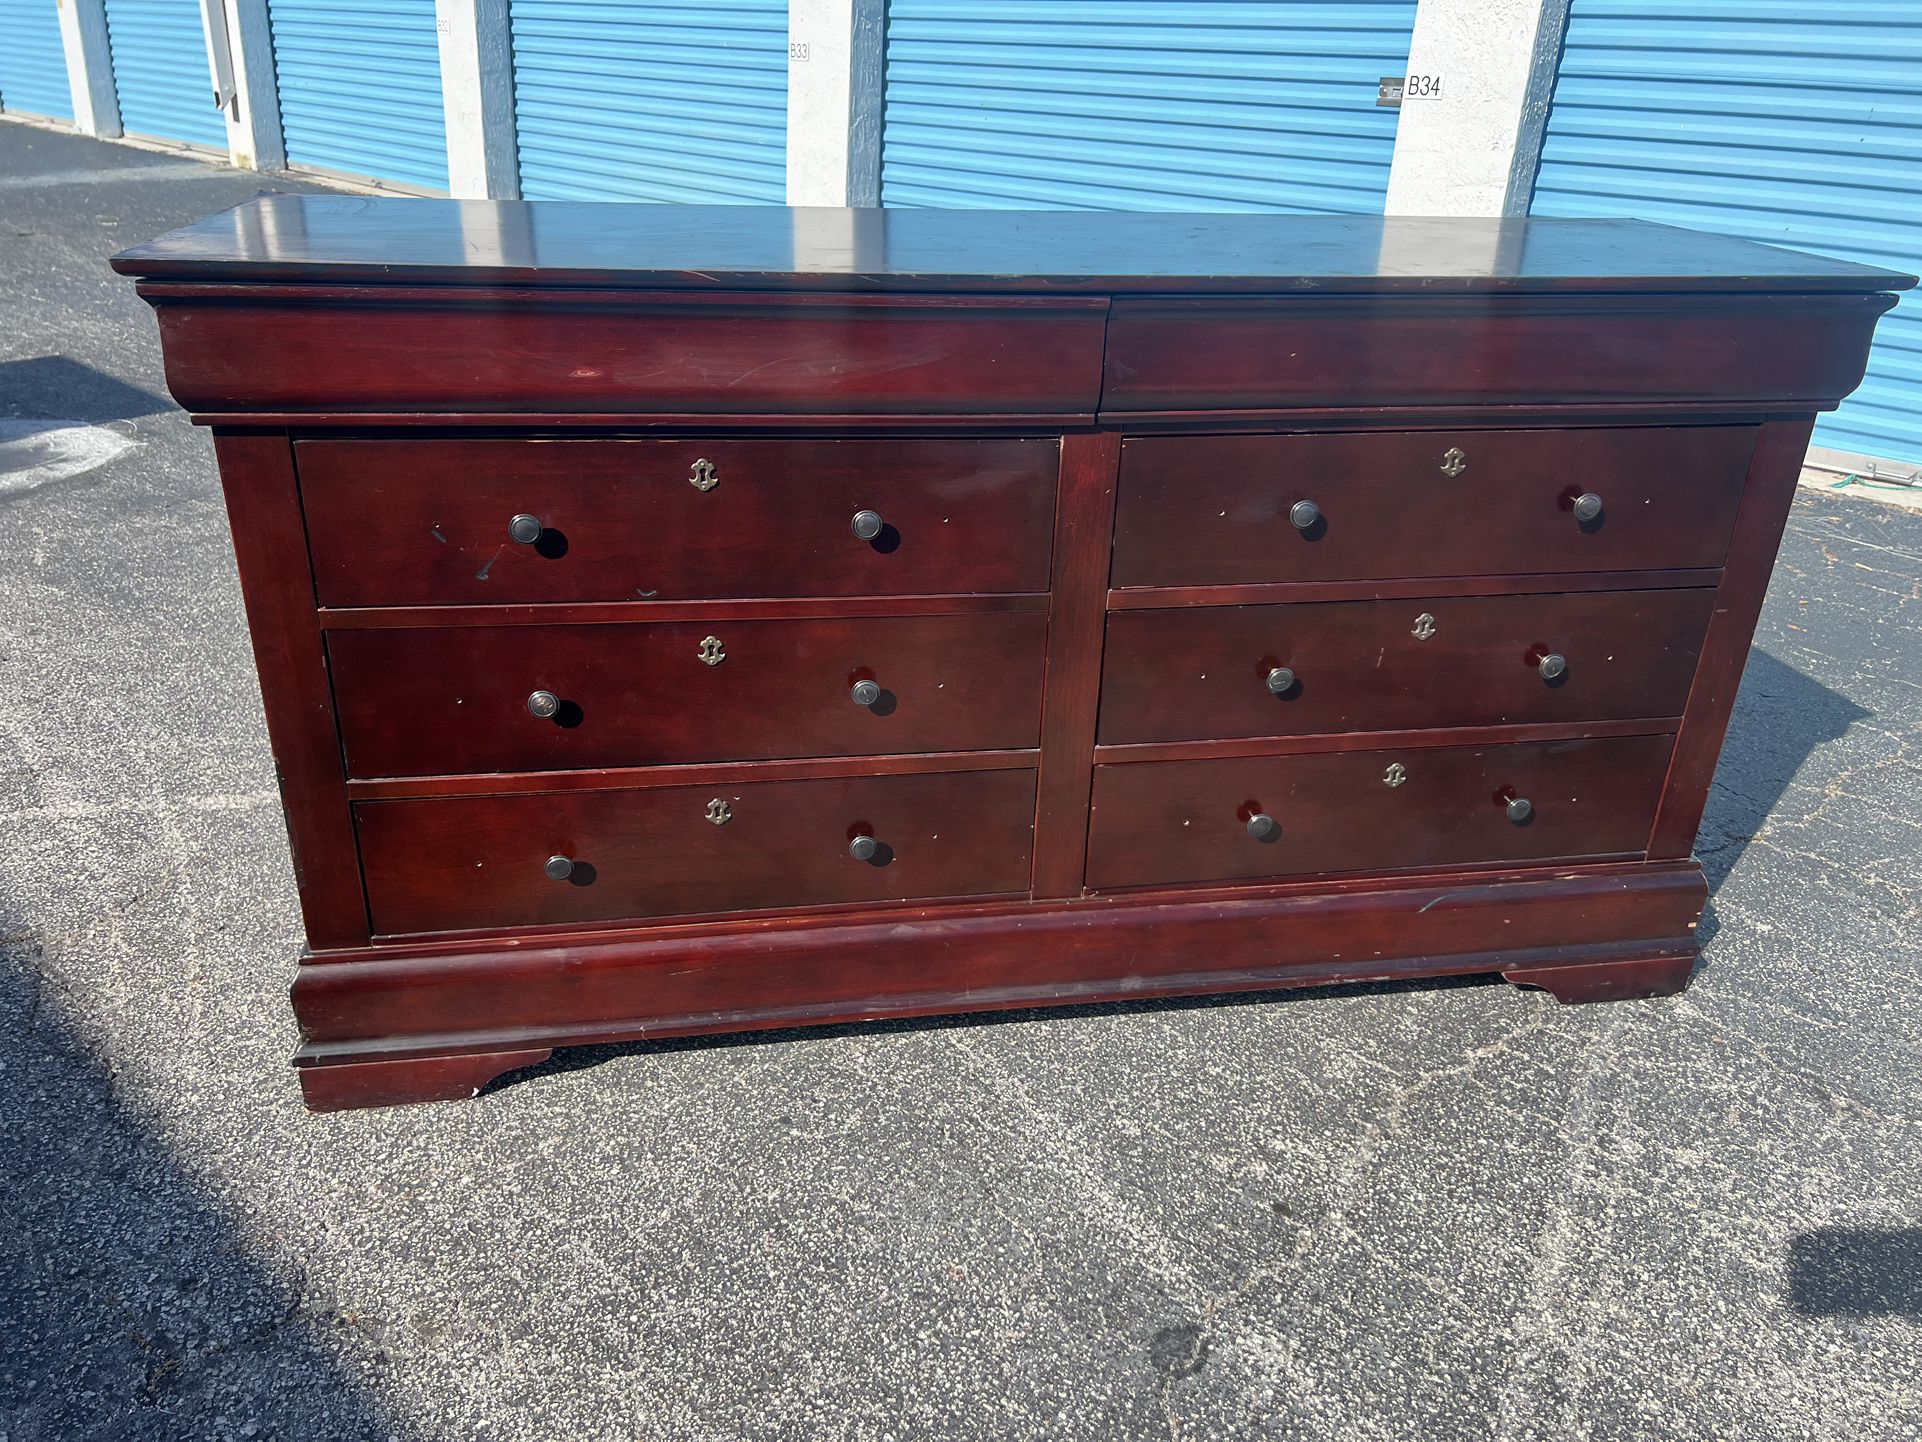 Delivery Available! Cherry Wooden 8 Drawer Bedroom Dresser Bureau Storage Chest! Large sturdy! All drawers work great. Has cosmetic wear see pics. 68x